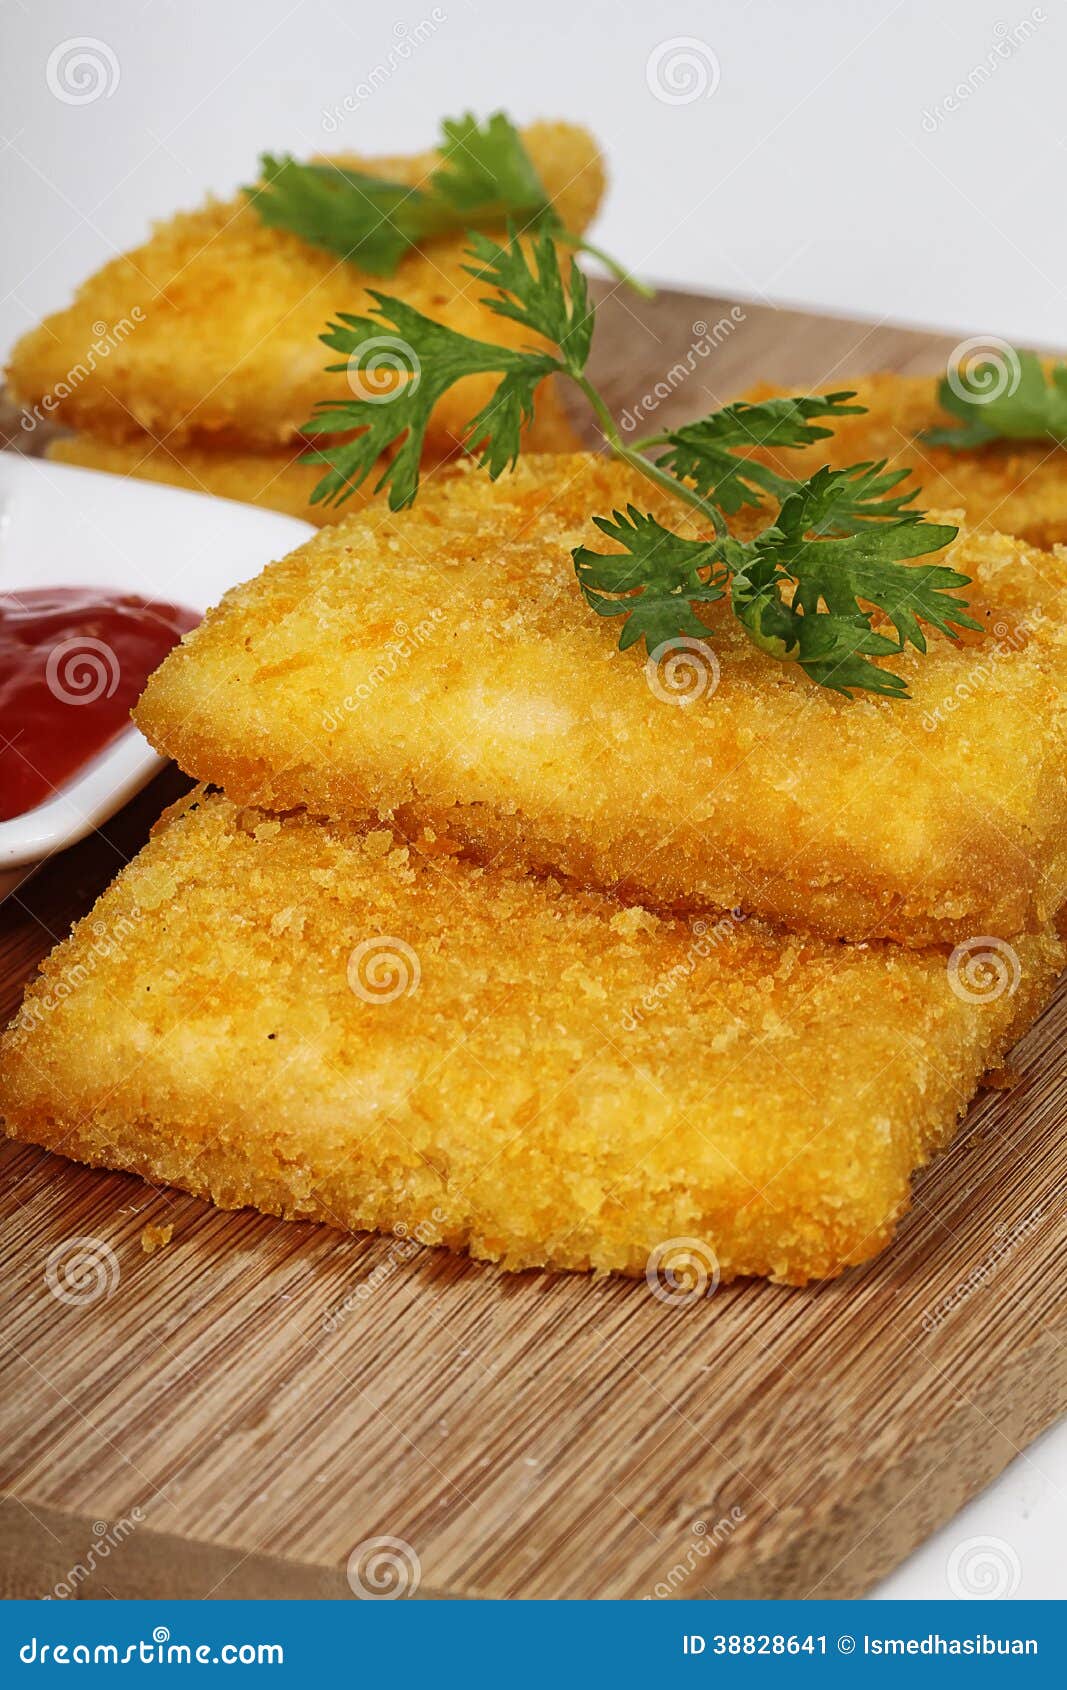 Rissoles stock image. Image of cutting, fillings, pastry - 38828641